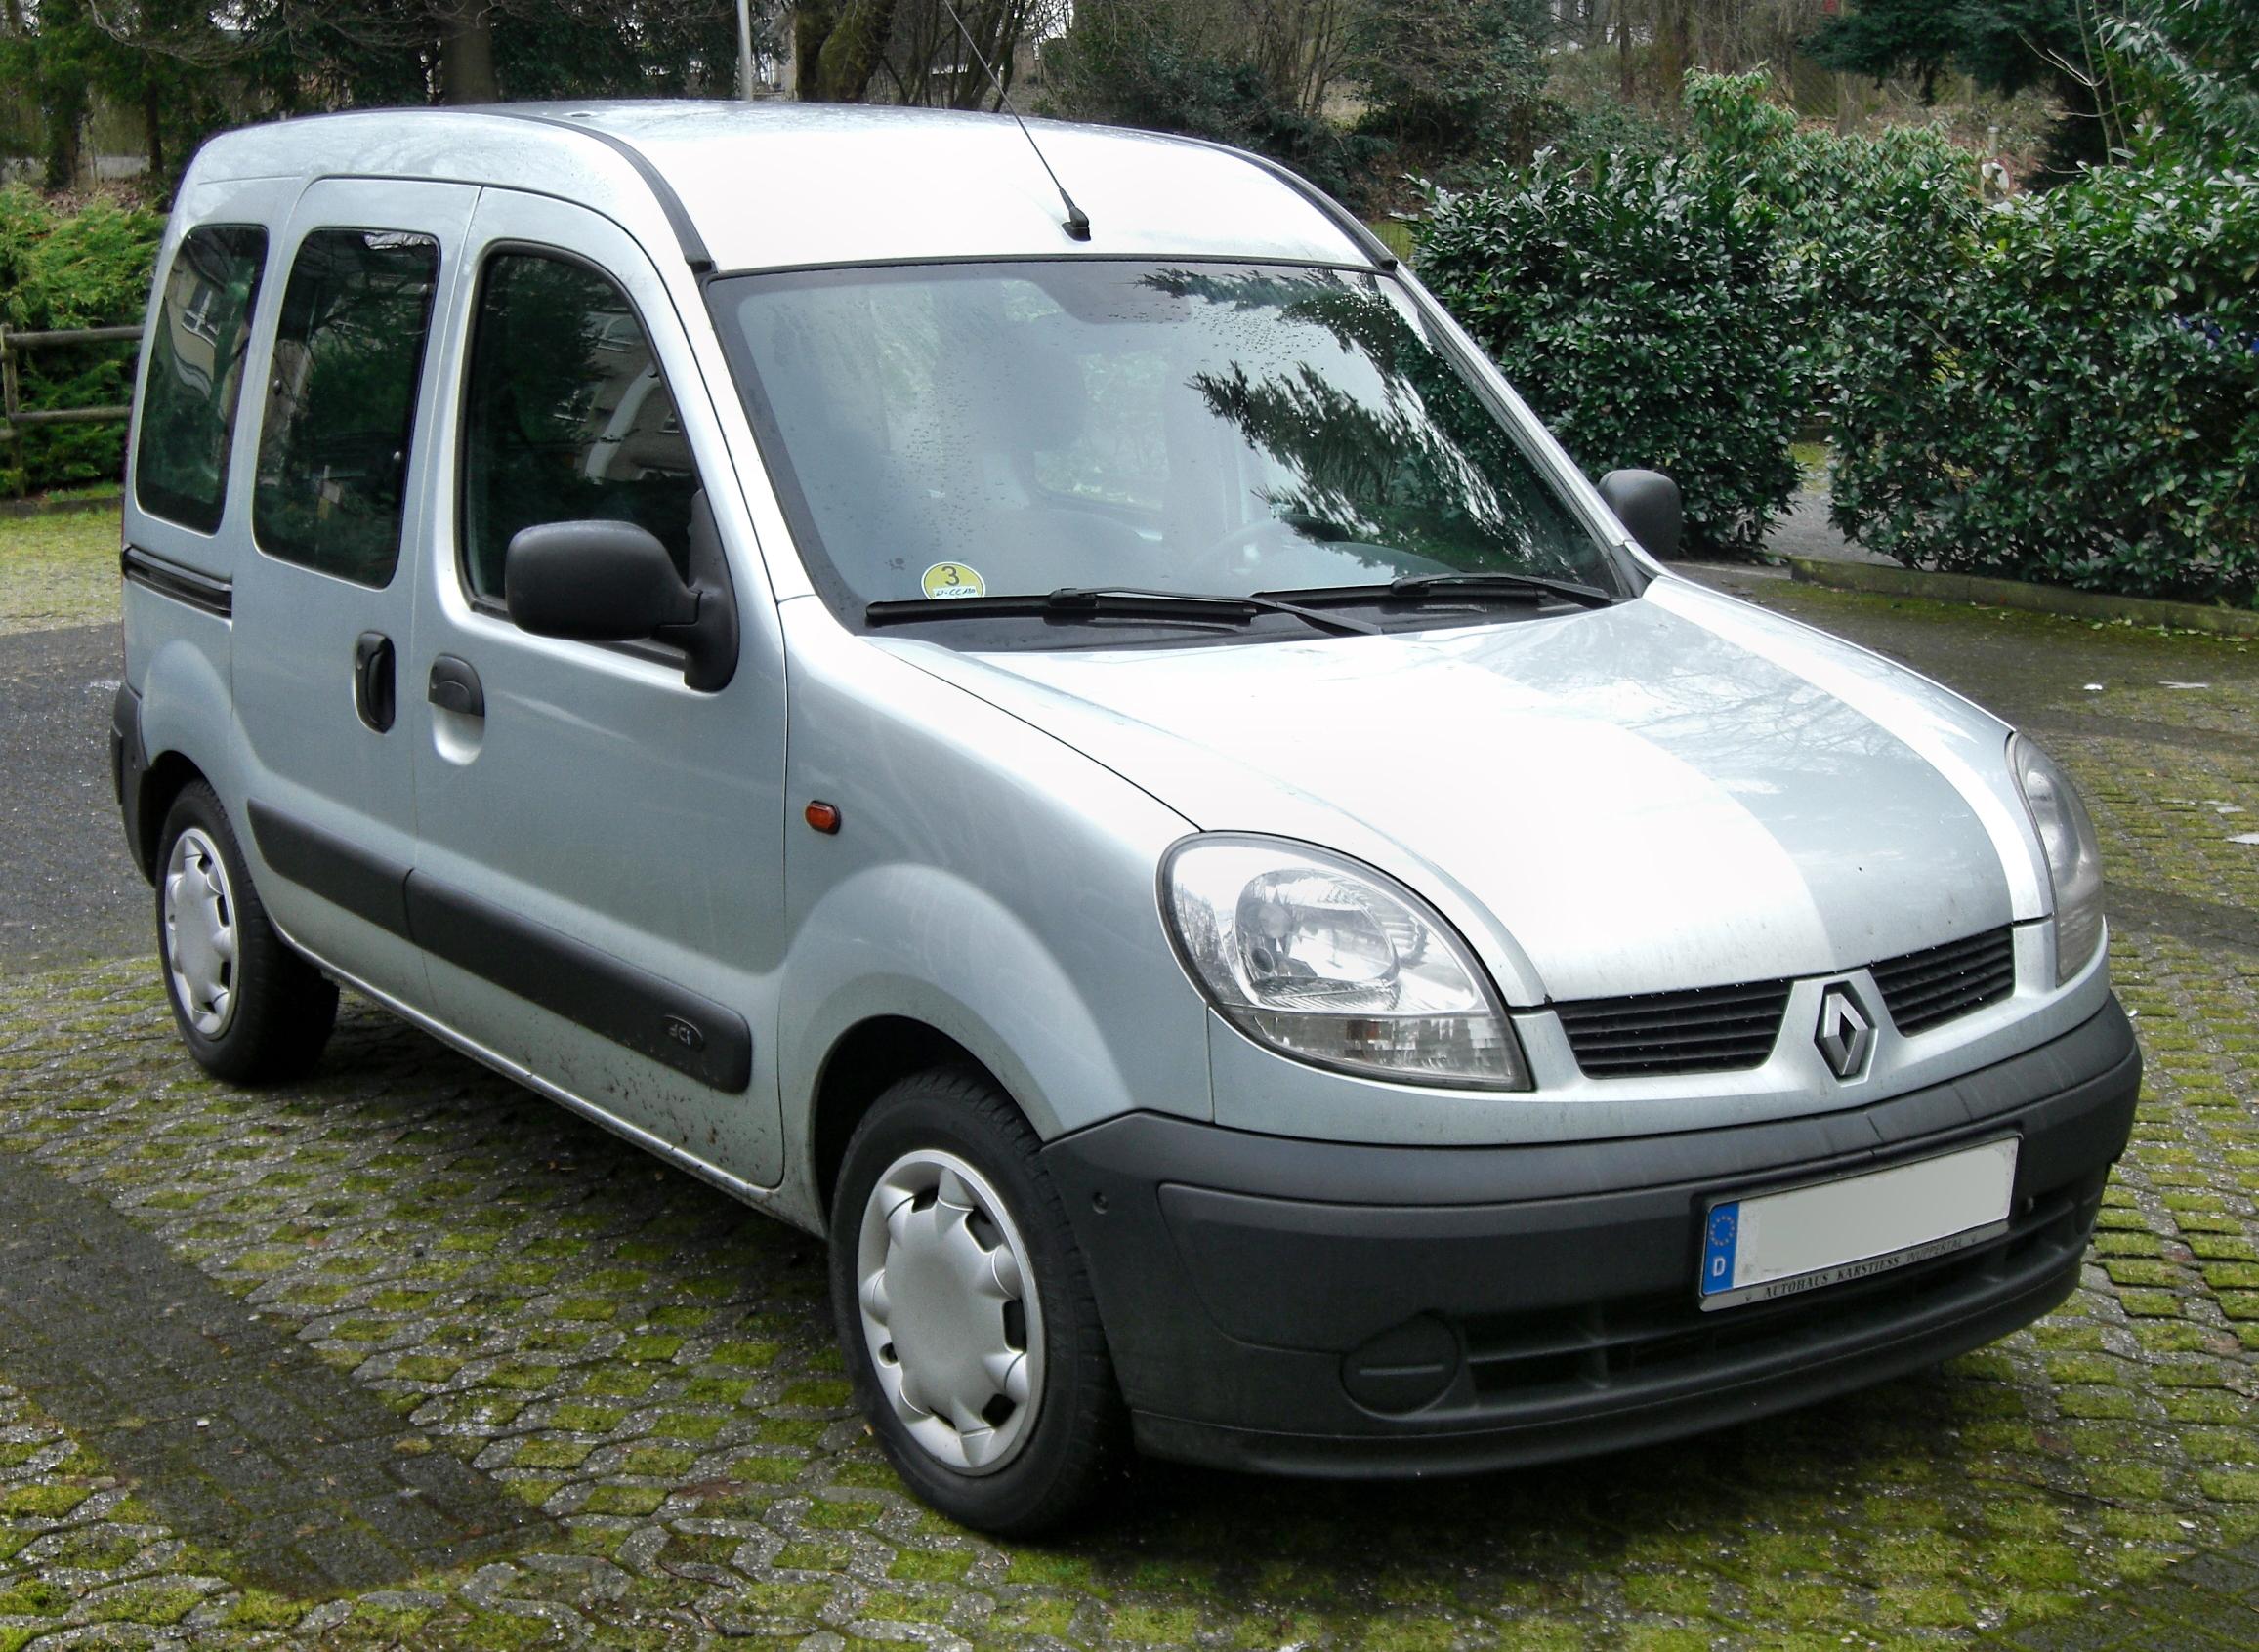 https://static.wikia.nocookie.net/tractors/images/8/82/Renault_Kangoo_front.JPG/revision/latest?cb=20110414151954